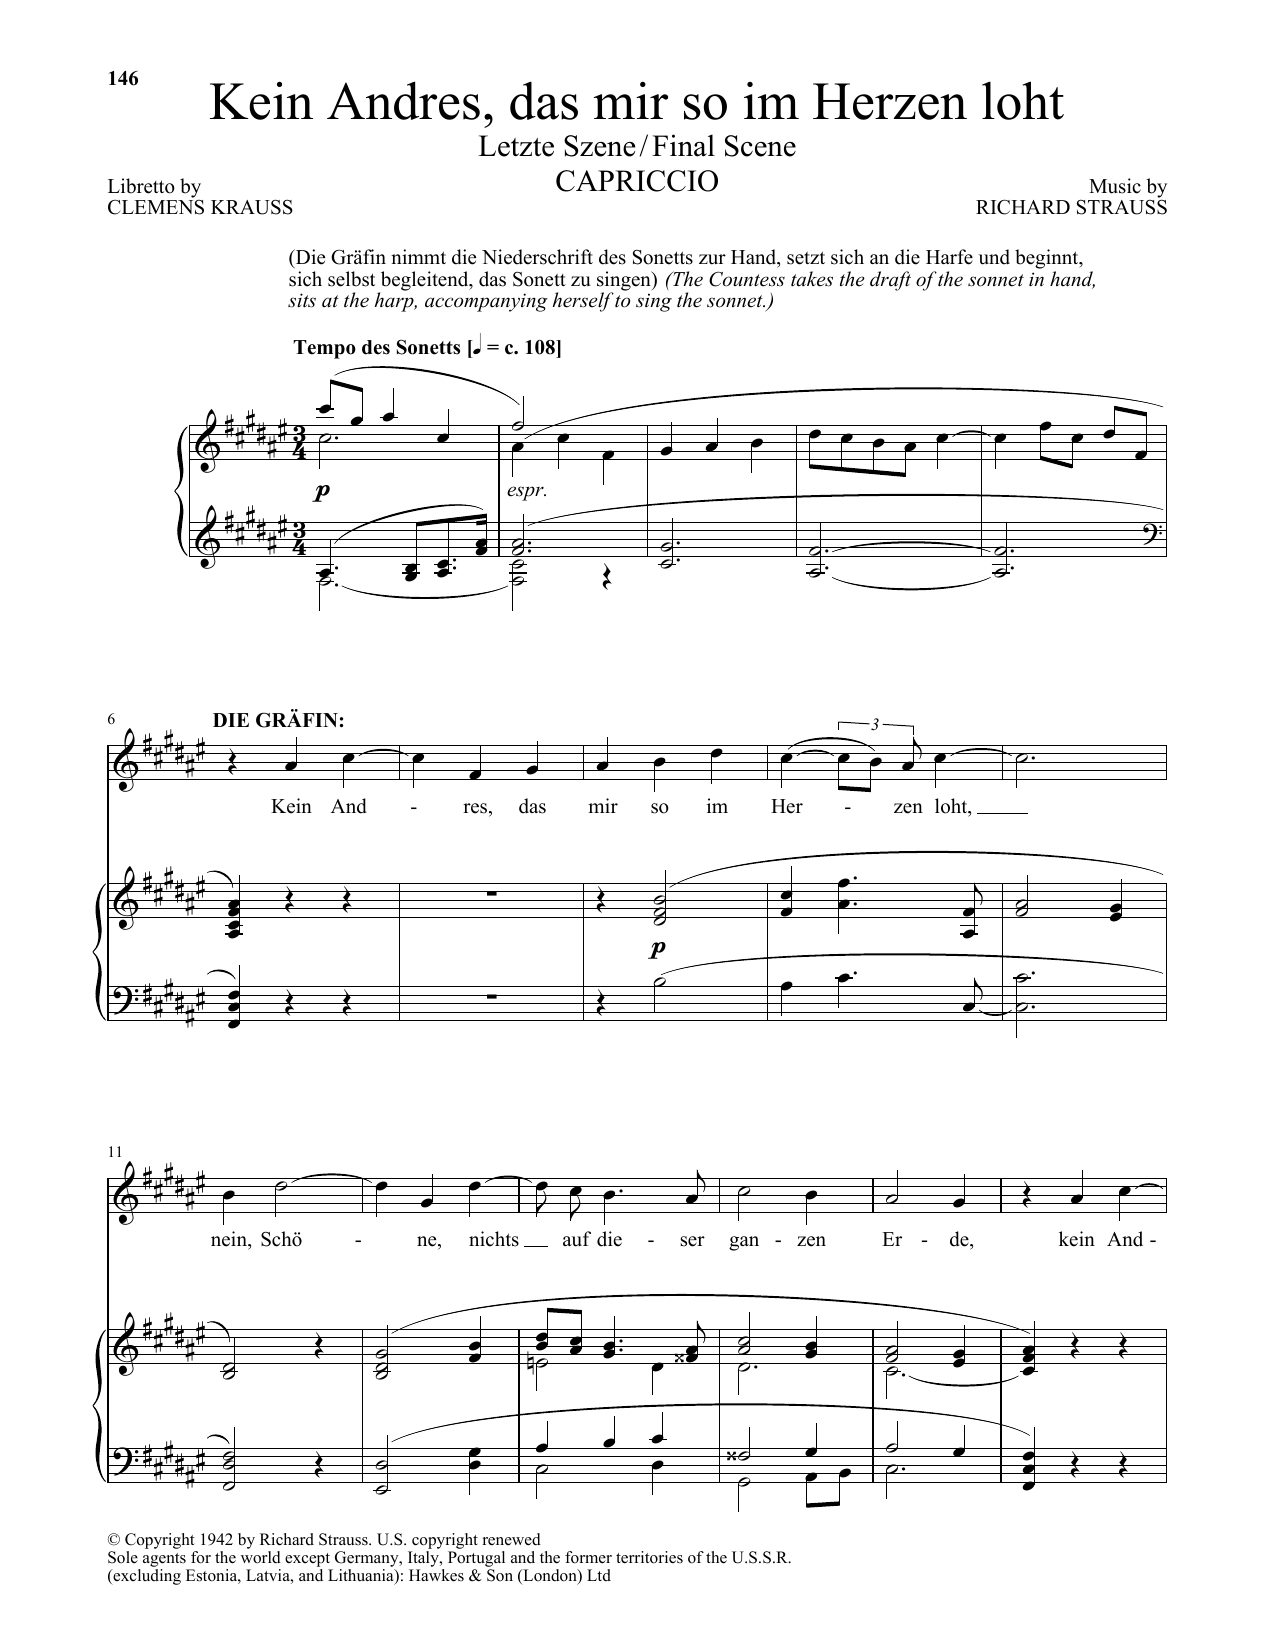 Richard Walters Kein Andres, das mir so im Herzen loht (Final Scene) (from Capriccio) sheet music preview music notes and score for Piano & Vocal including 15 page(s)